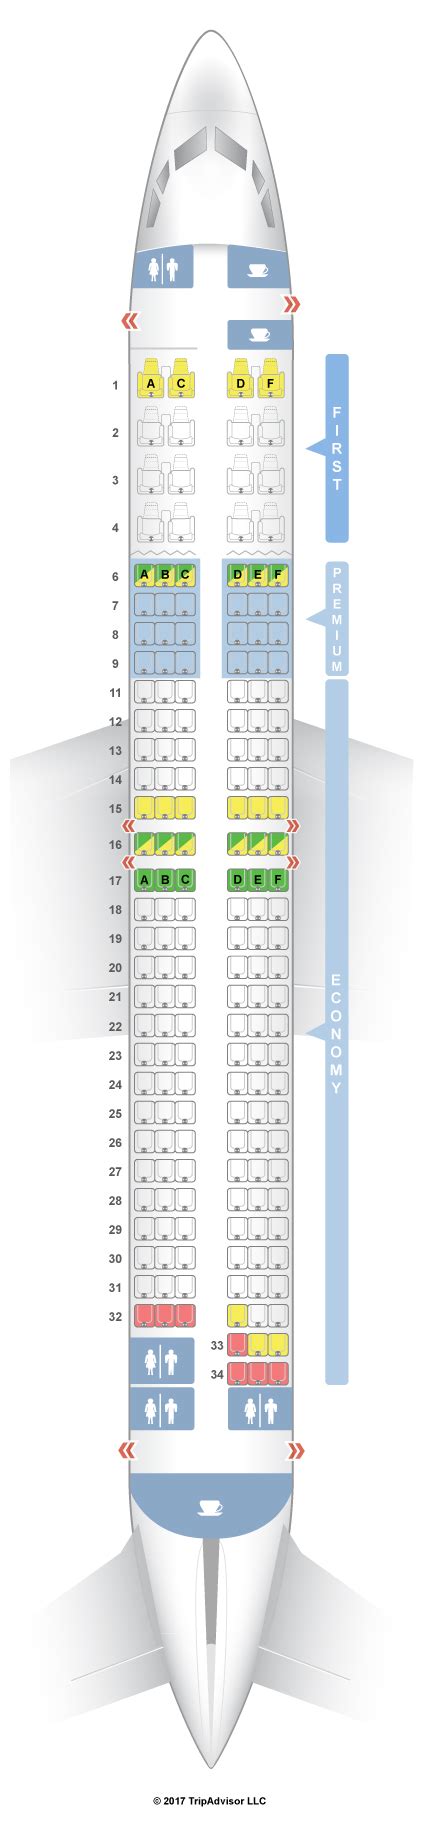 Seatguru alaska 737-900. Seat Map Alaska Airlines Boeing 737-900 (739) Airplane Boeing 737-900 (739) Alaska Airlines with 3 classes and 178 seats on board. Use airplane seat map to find which ones are more comfortable and which should be avoided. Tap the seat on the map to see the details. 